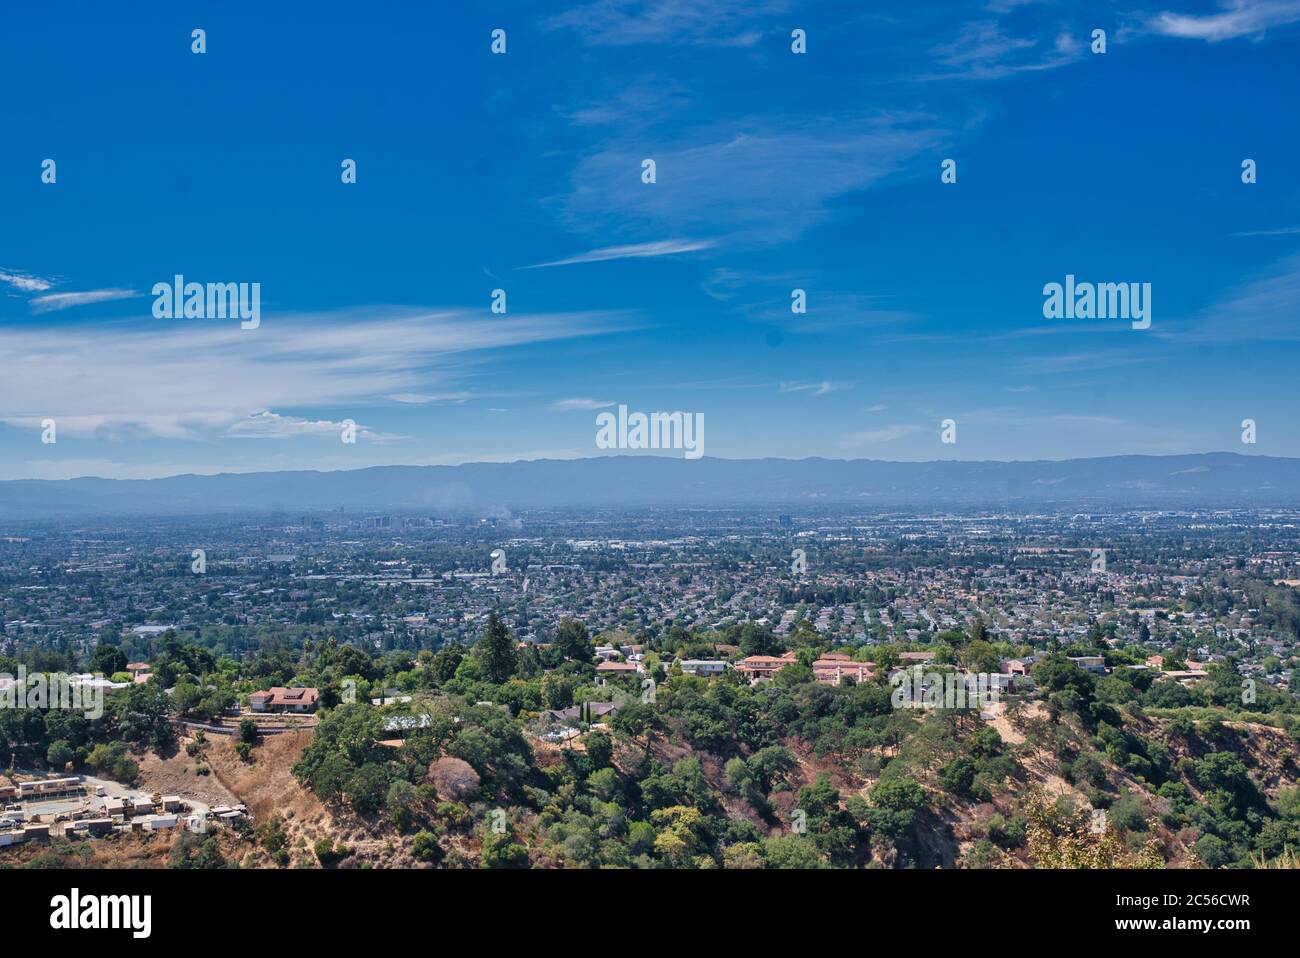 Aerial shot of the Griffith Park located in Los Angles, California during daylight Stock Photo